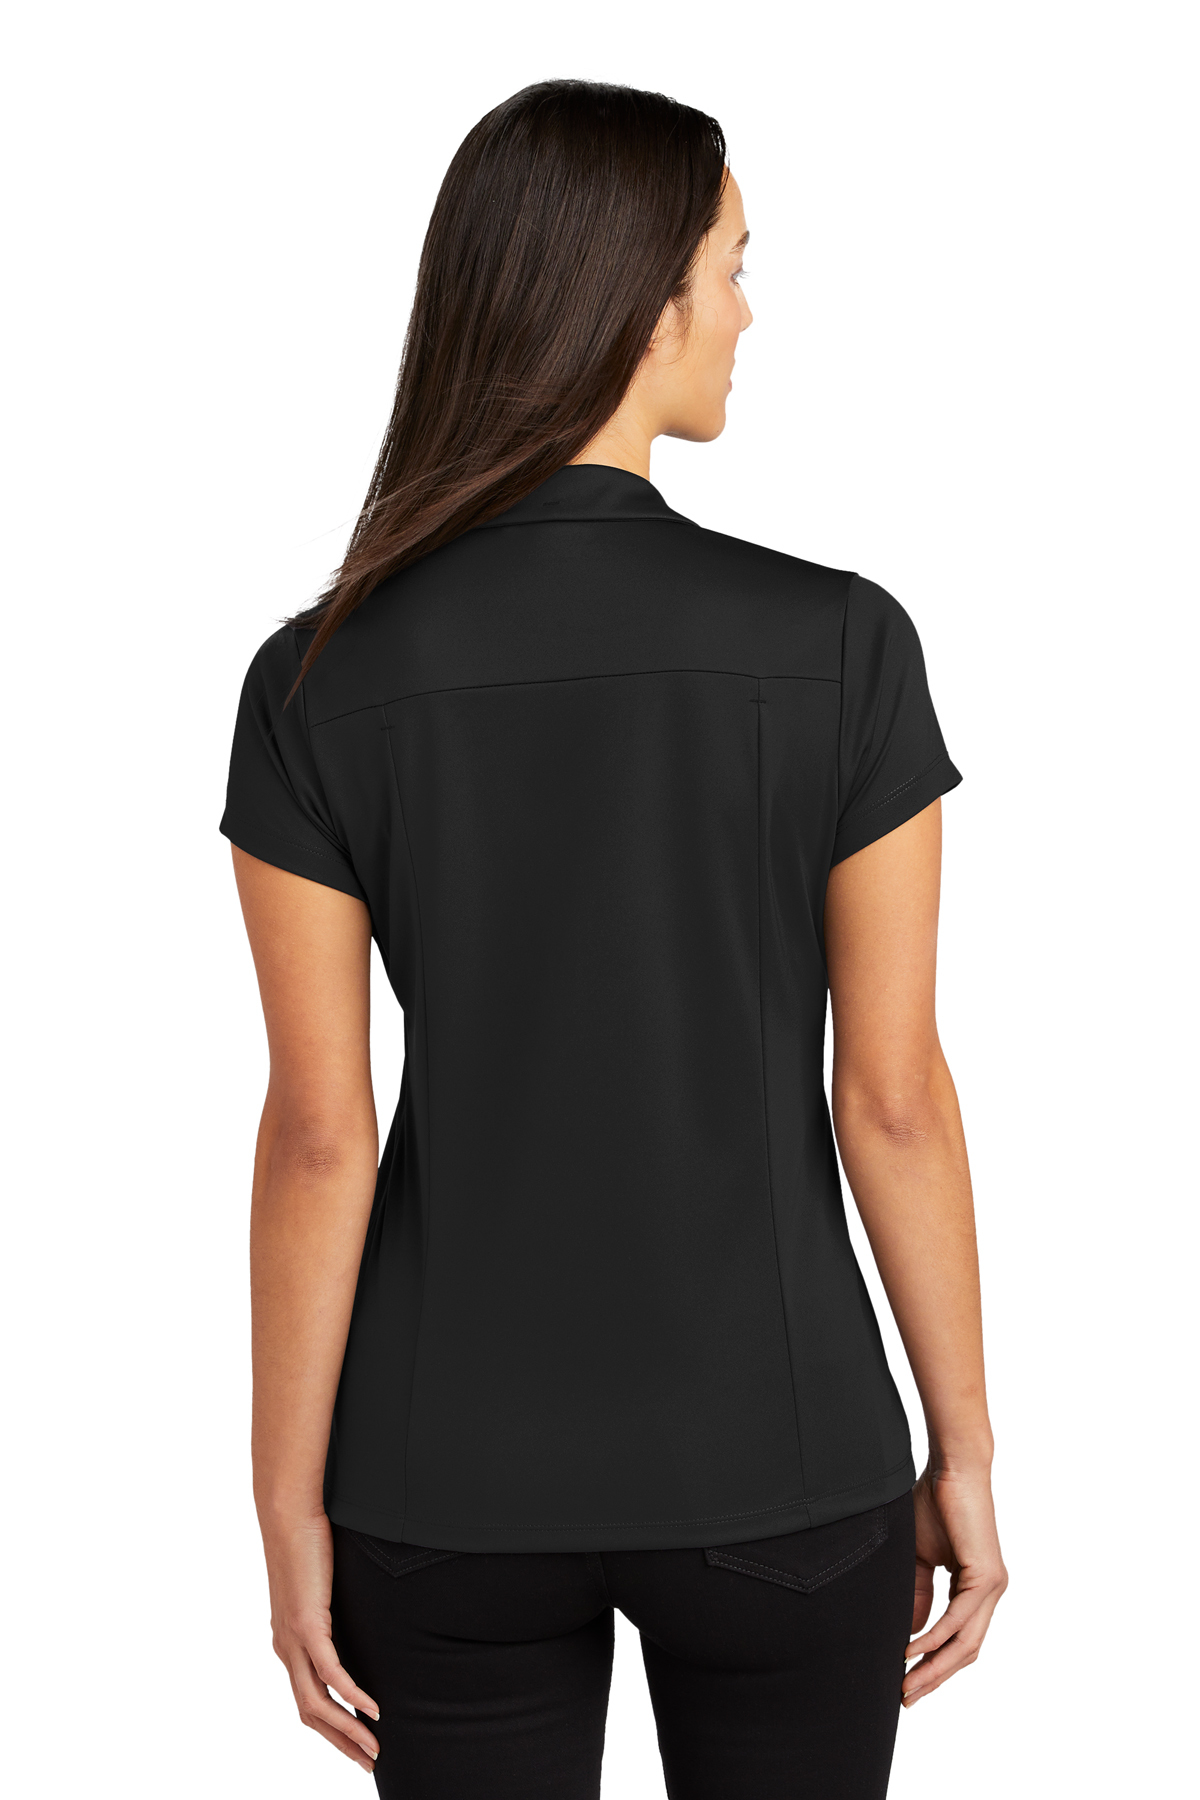 OGIO ® Ladies Framework Polo | Product | Company Casuals